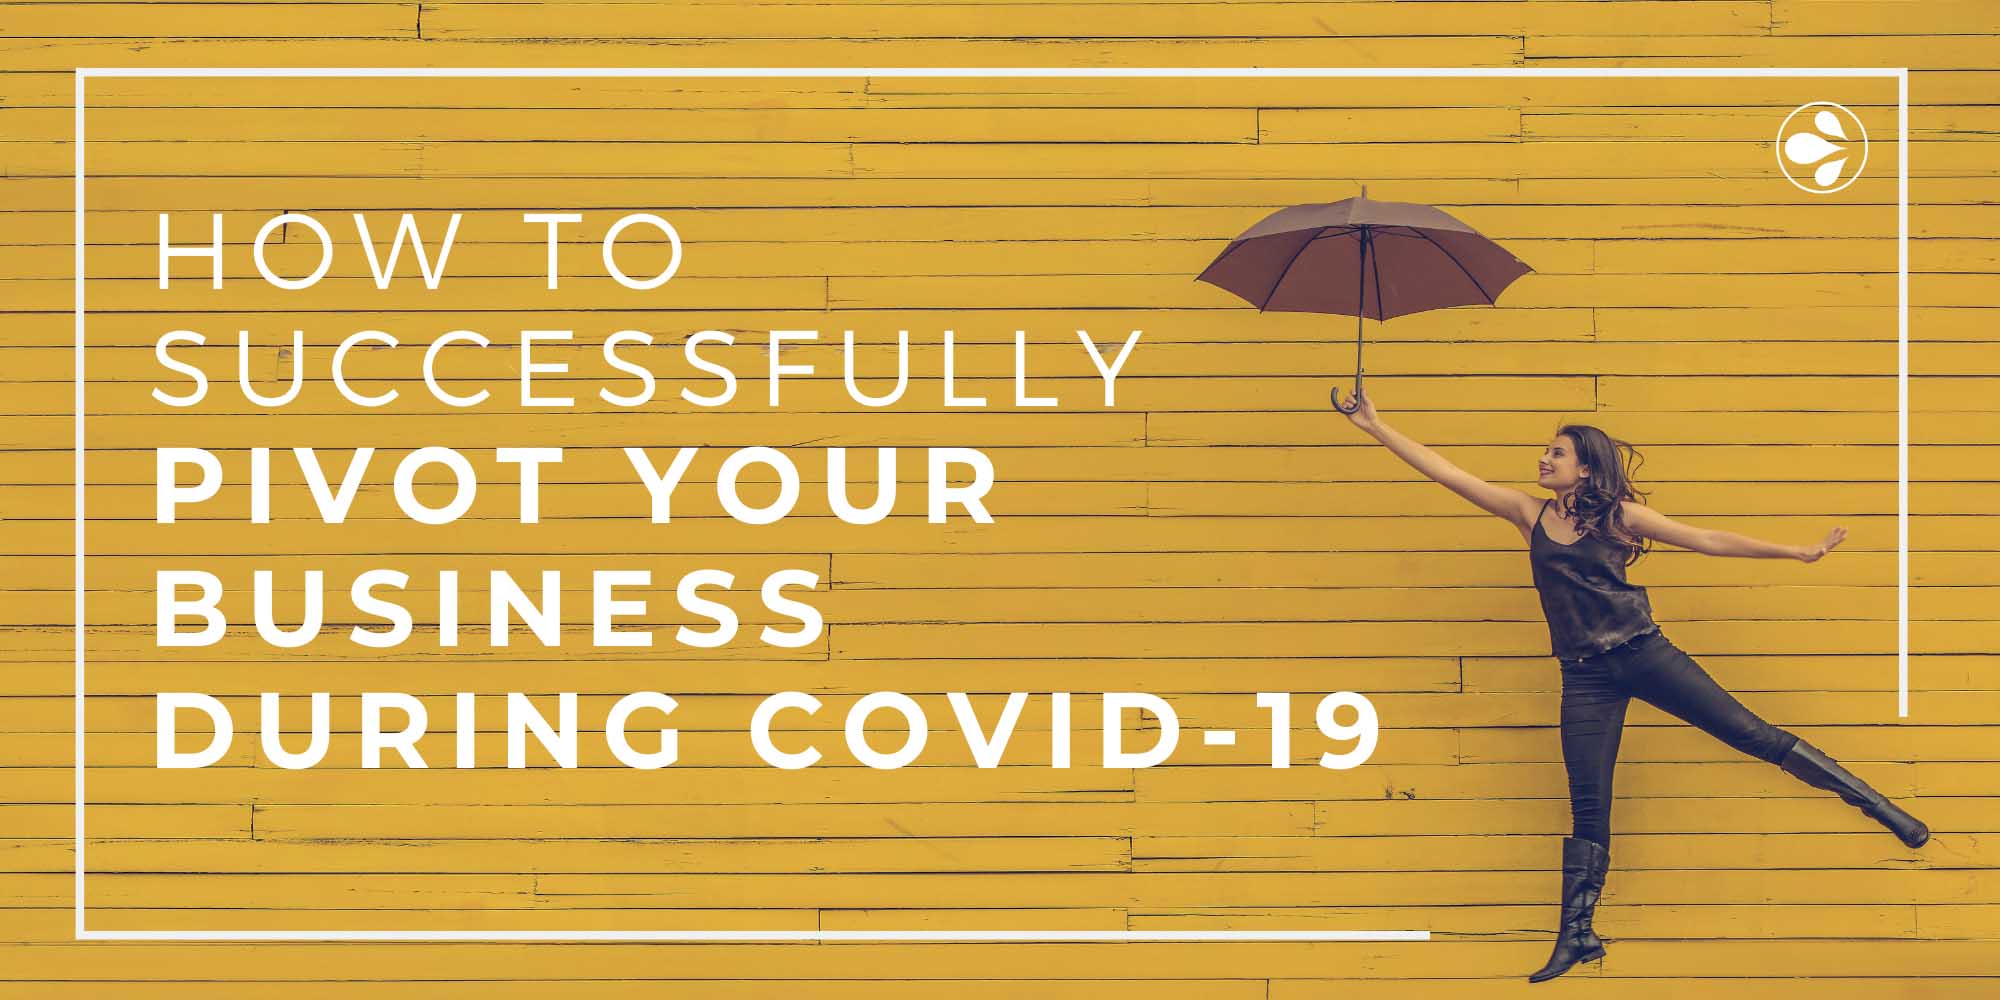 How to successfully pivot your business during COVID-19